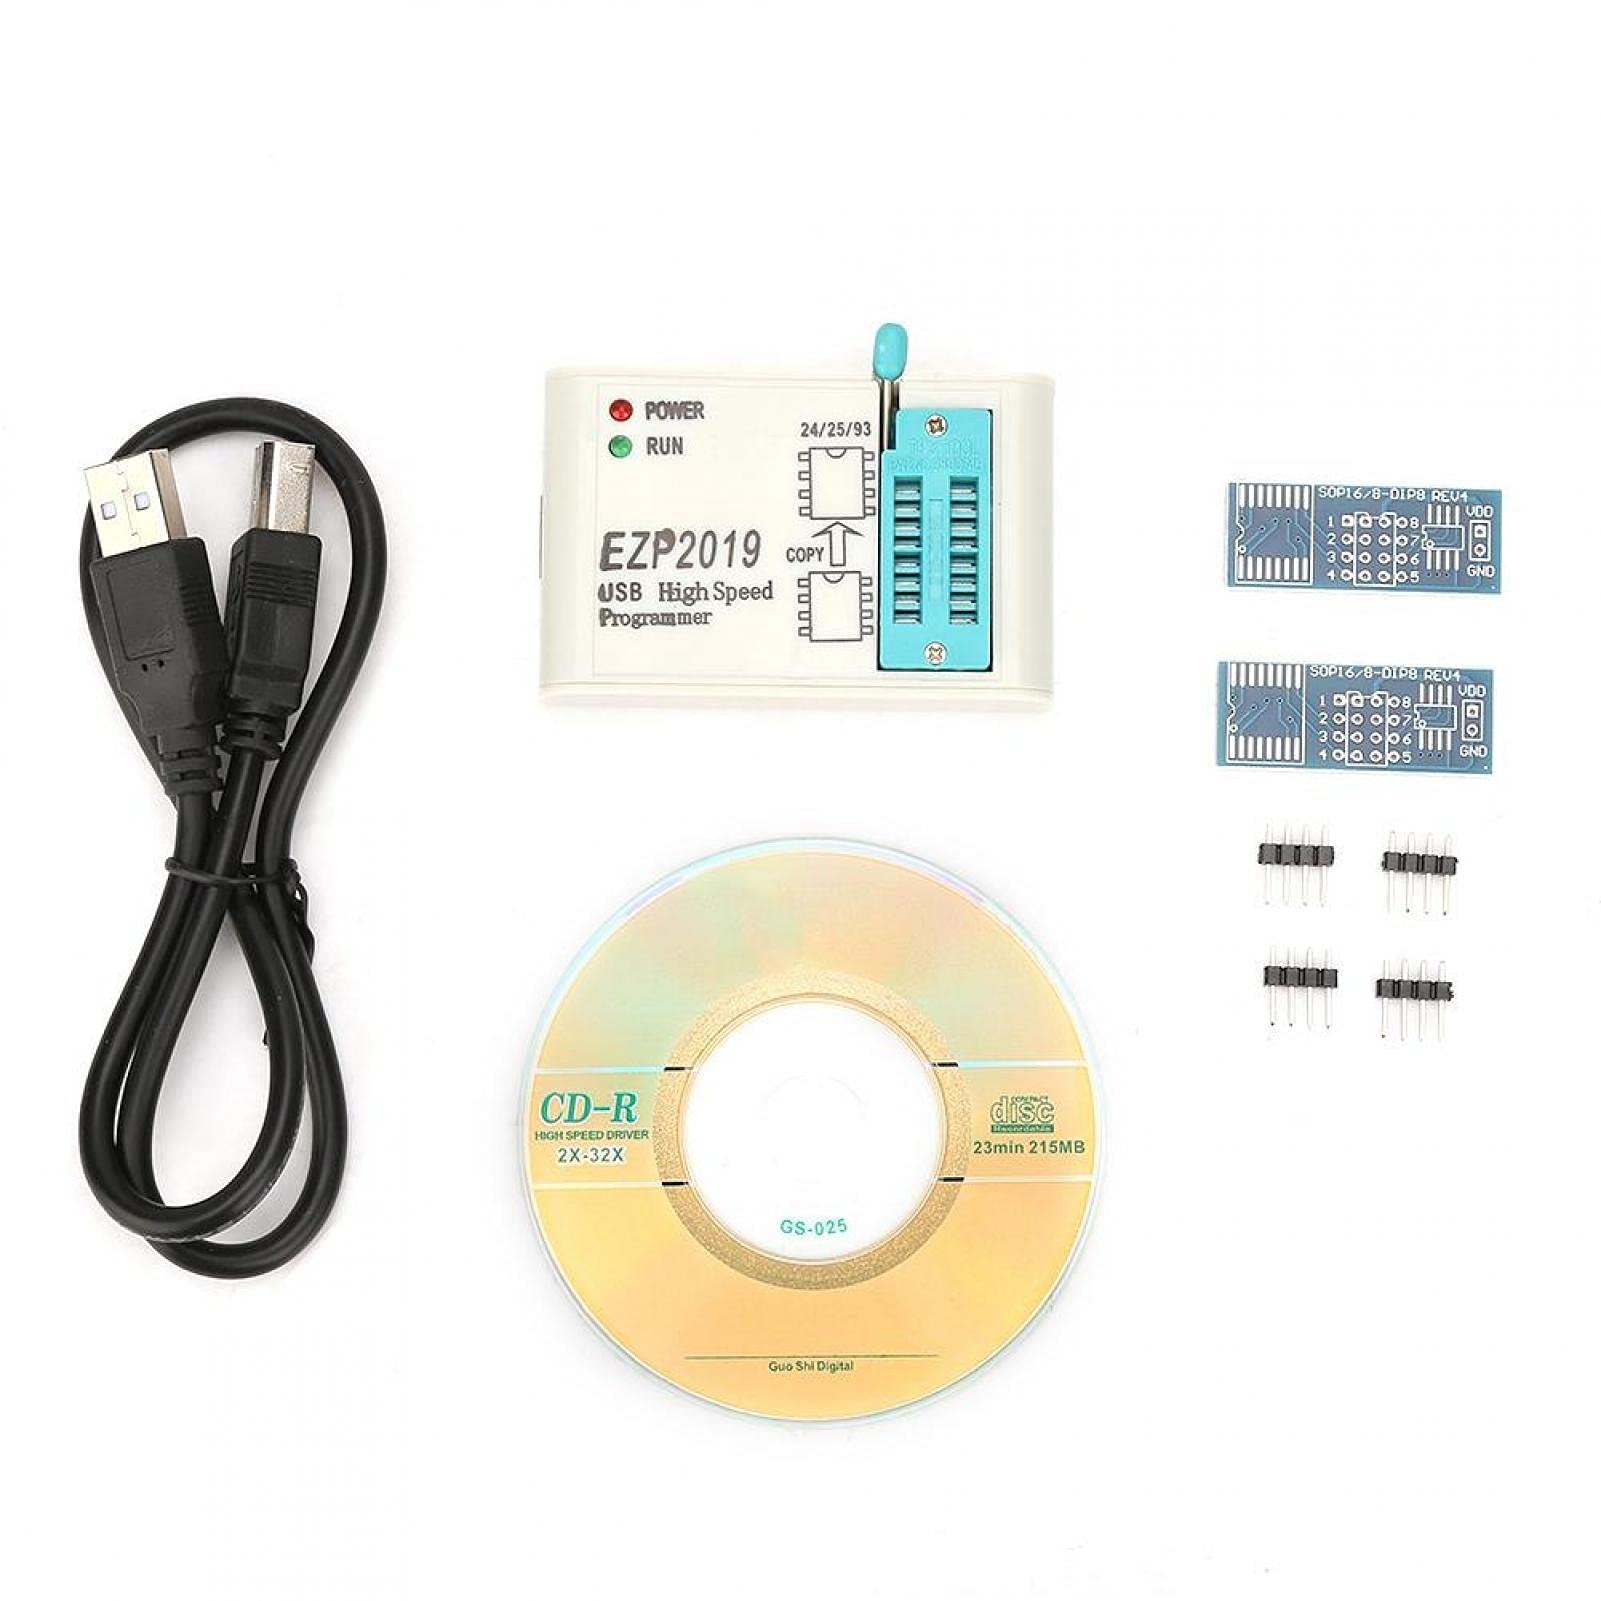 Telituny USB Programmer EZP2019 High Speed Flash Programmer for 24 25 93 bios with Off-line Copy Function for Circuit Board Memory Chip DVD Repair (#1)